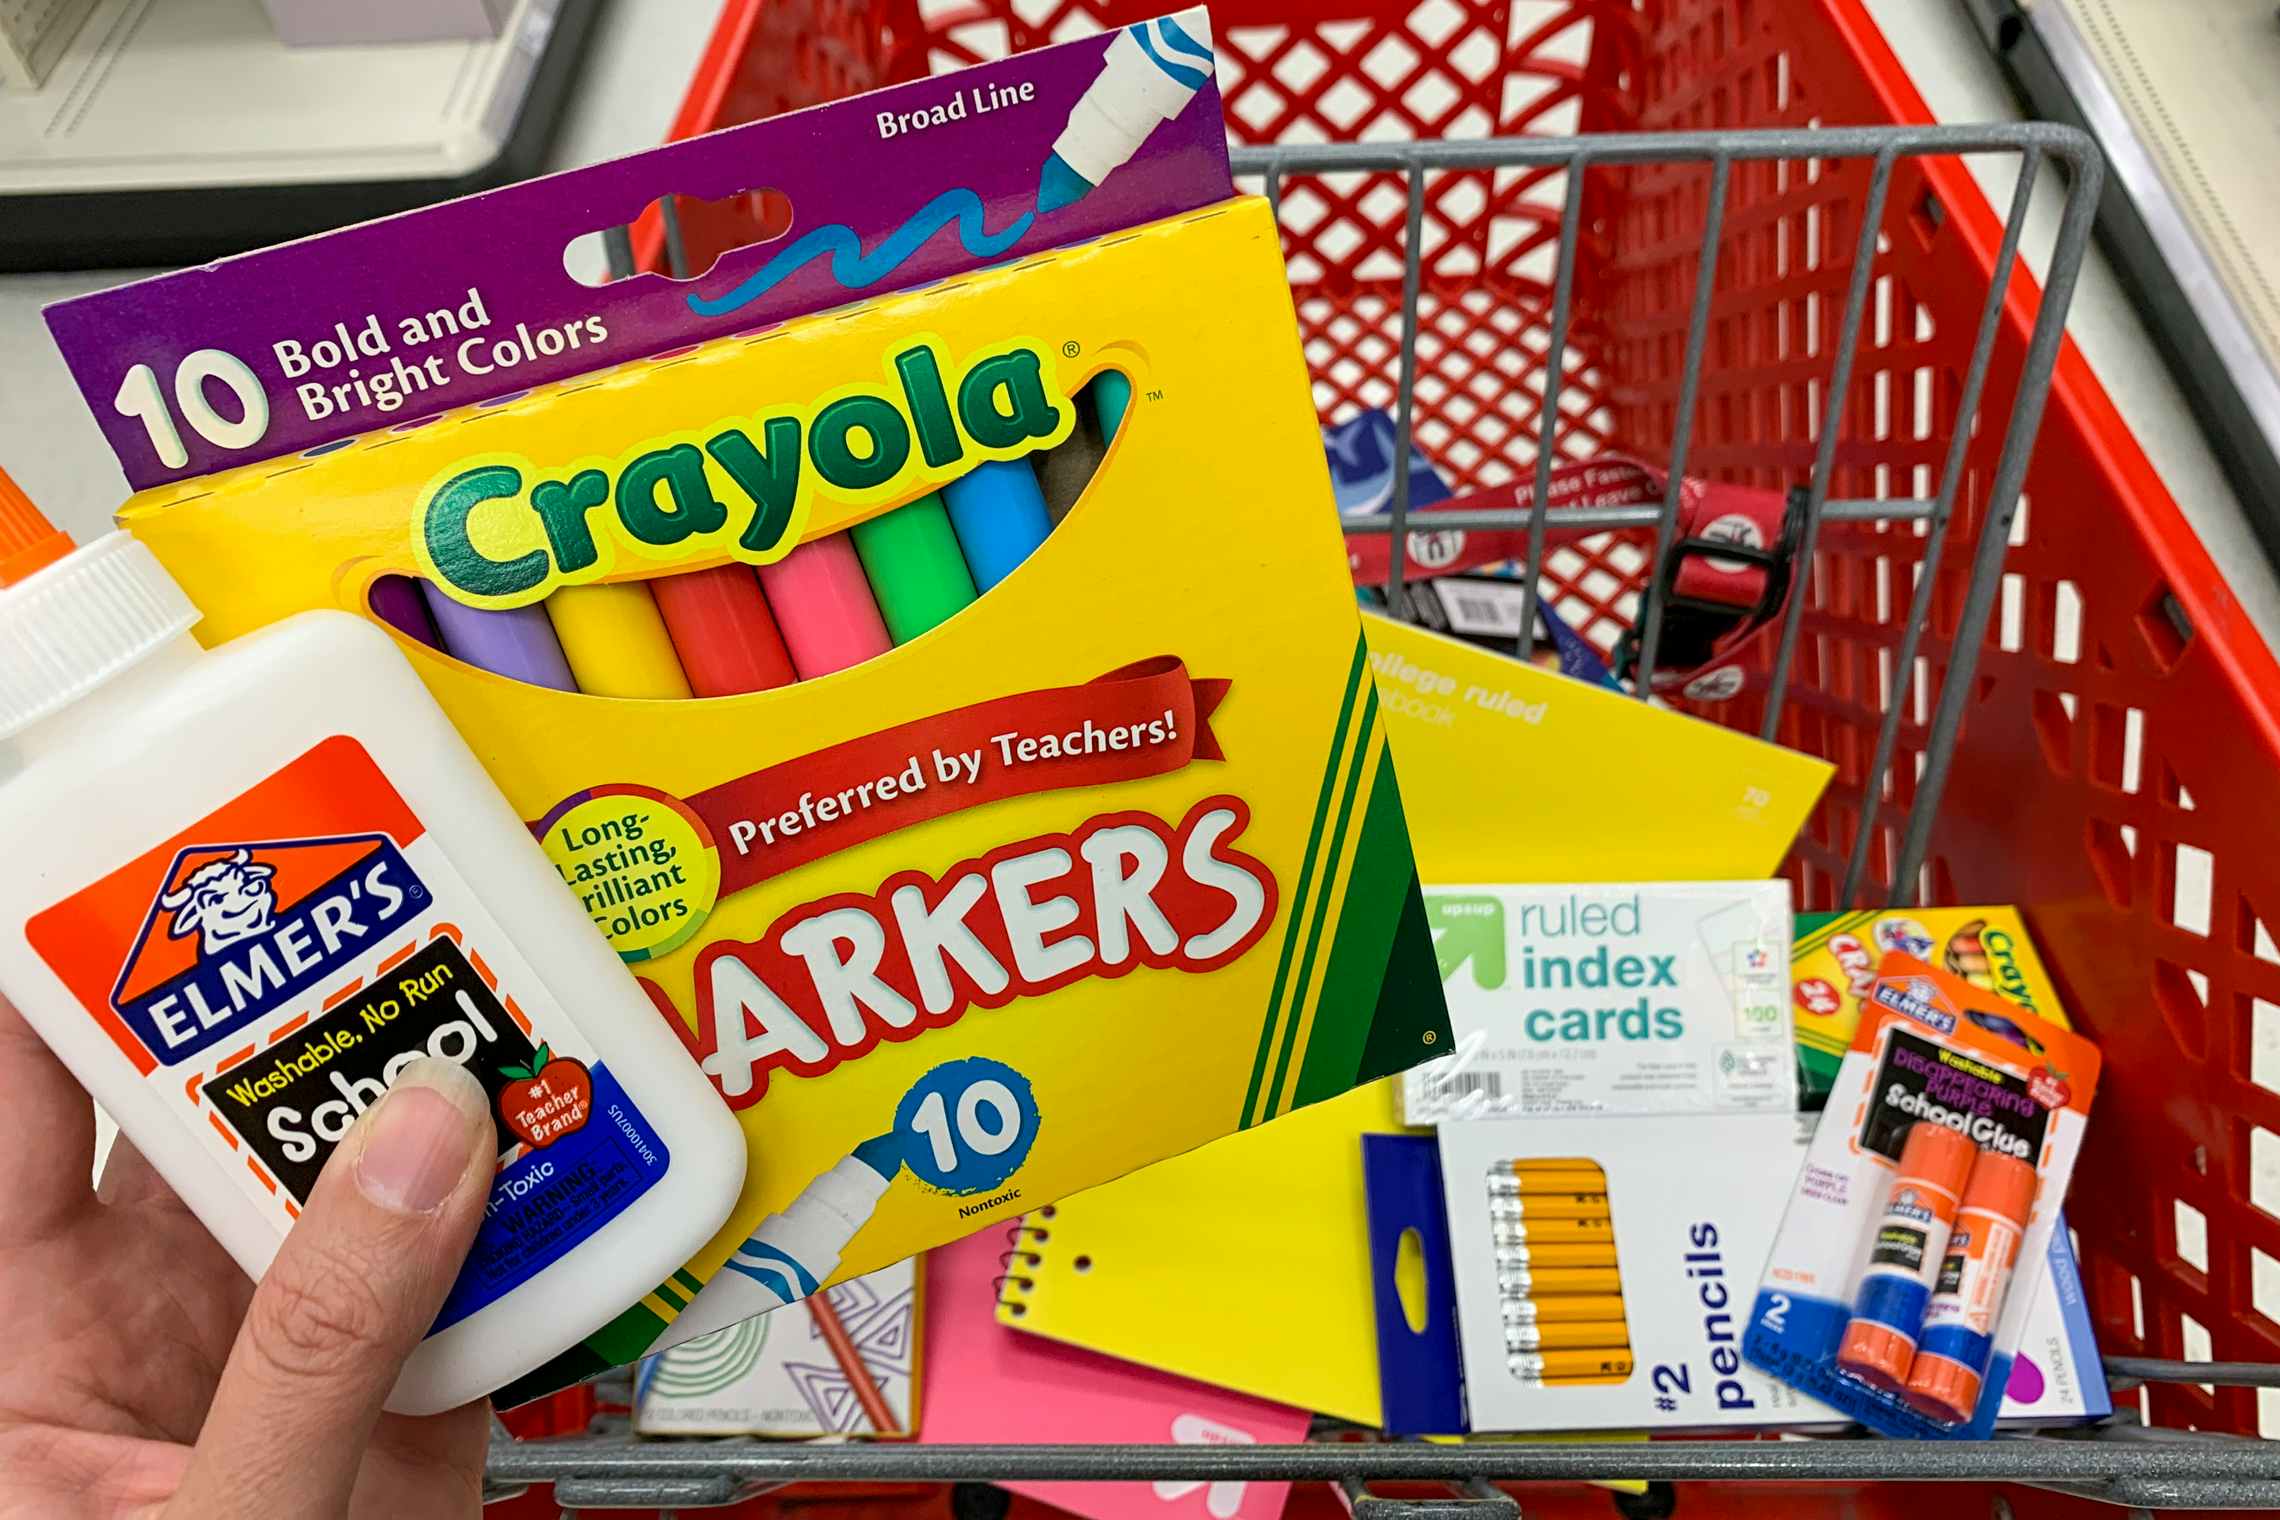 A person's hand holding Crayola markers and Elmer's glue above a Target shopping cart basket filled with other school supplies.